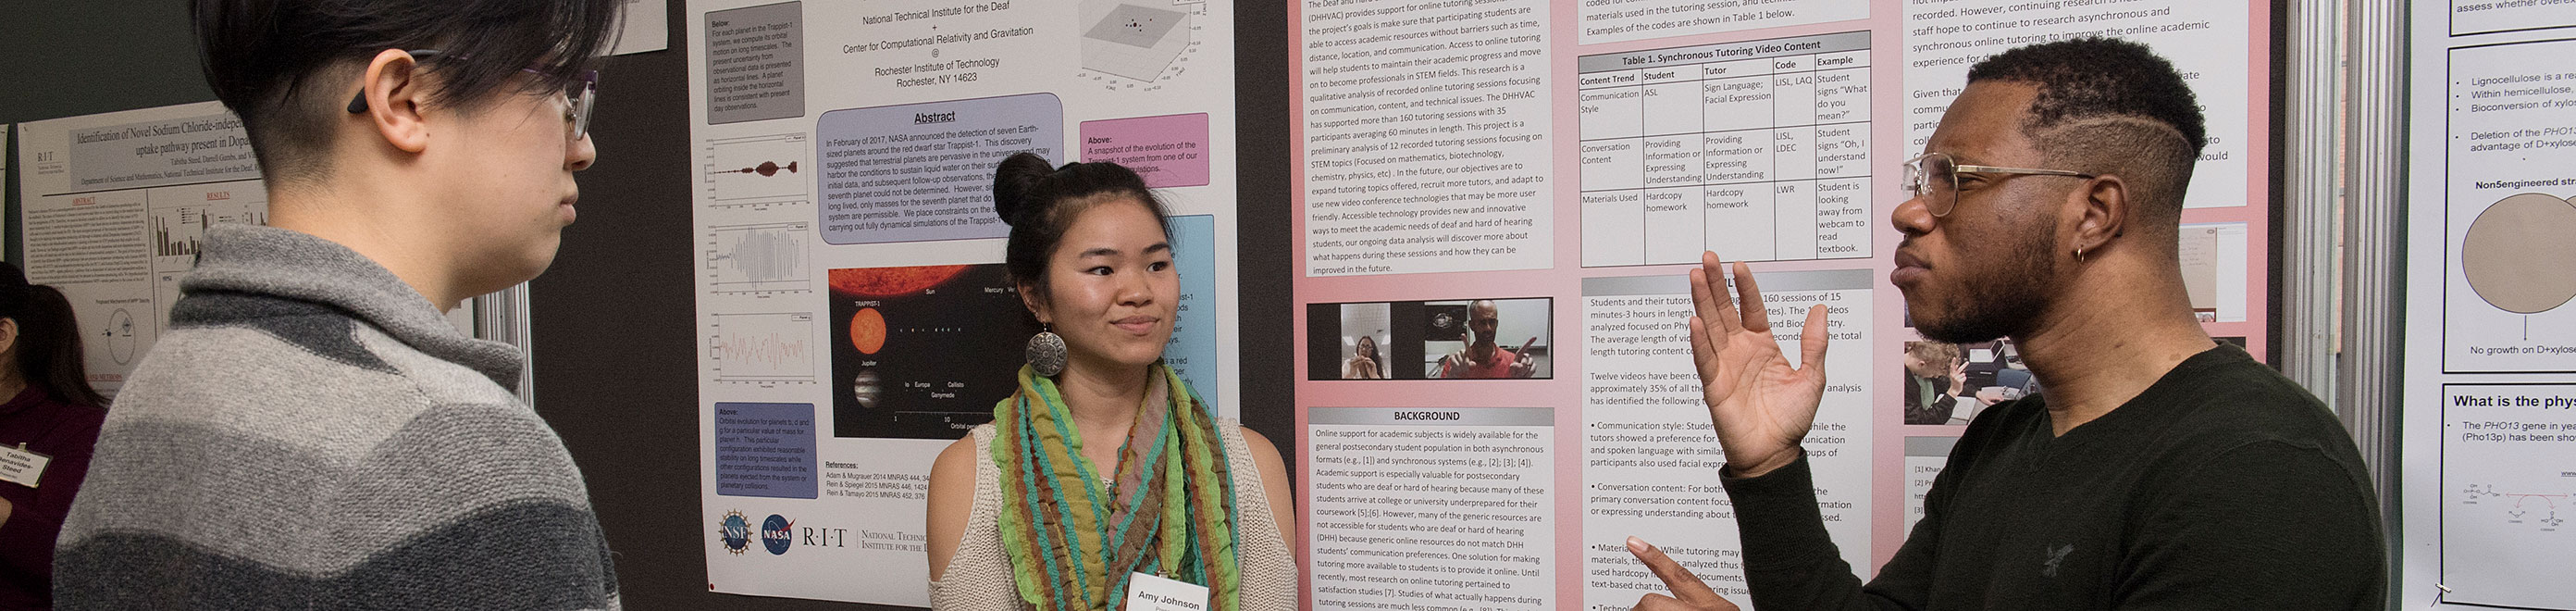 Three students discussing research presented during a poster session